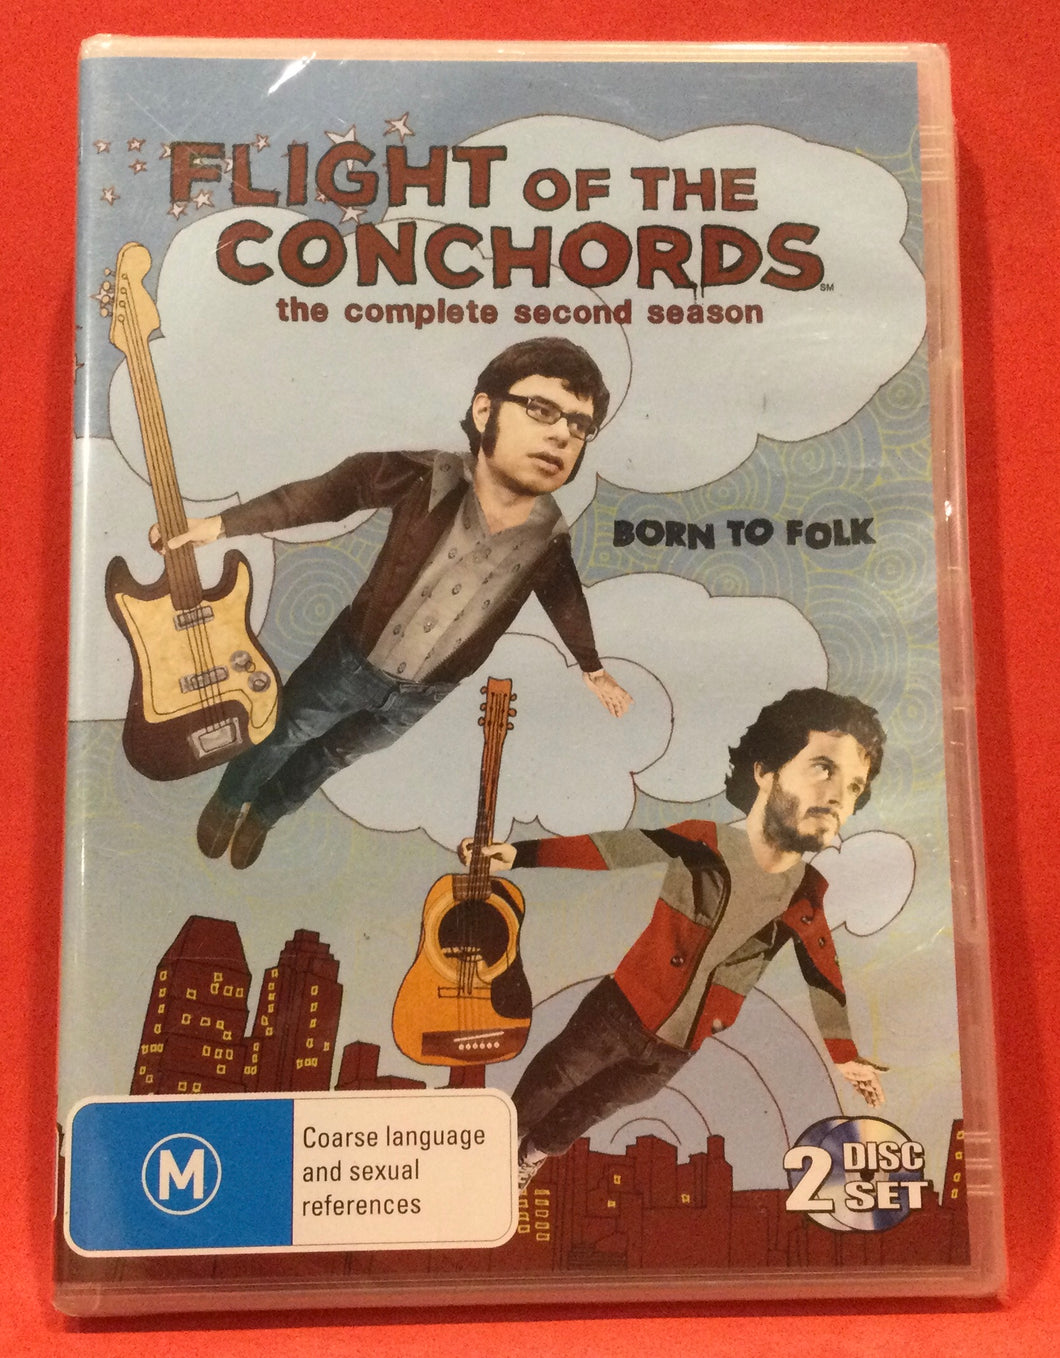 FLIGHT OF THE CONCHORDS - BORN TO FOLK - COMPLETE SECOND SEASON - 2 DVD DISCS (SEALED)